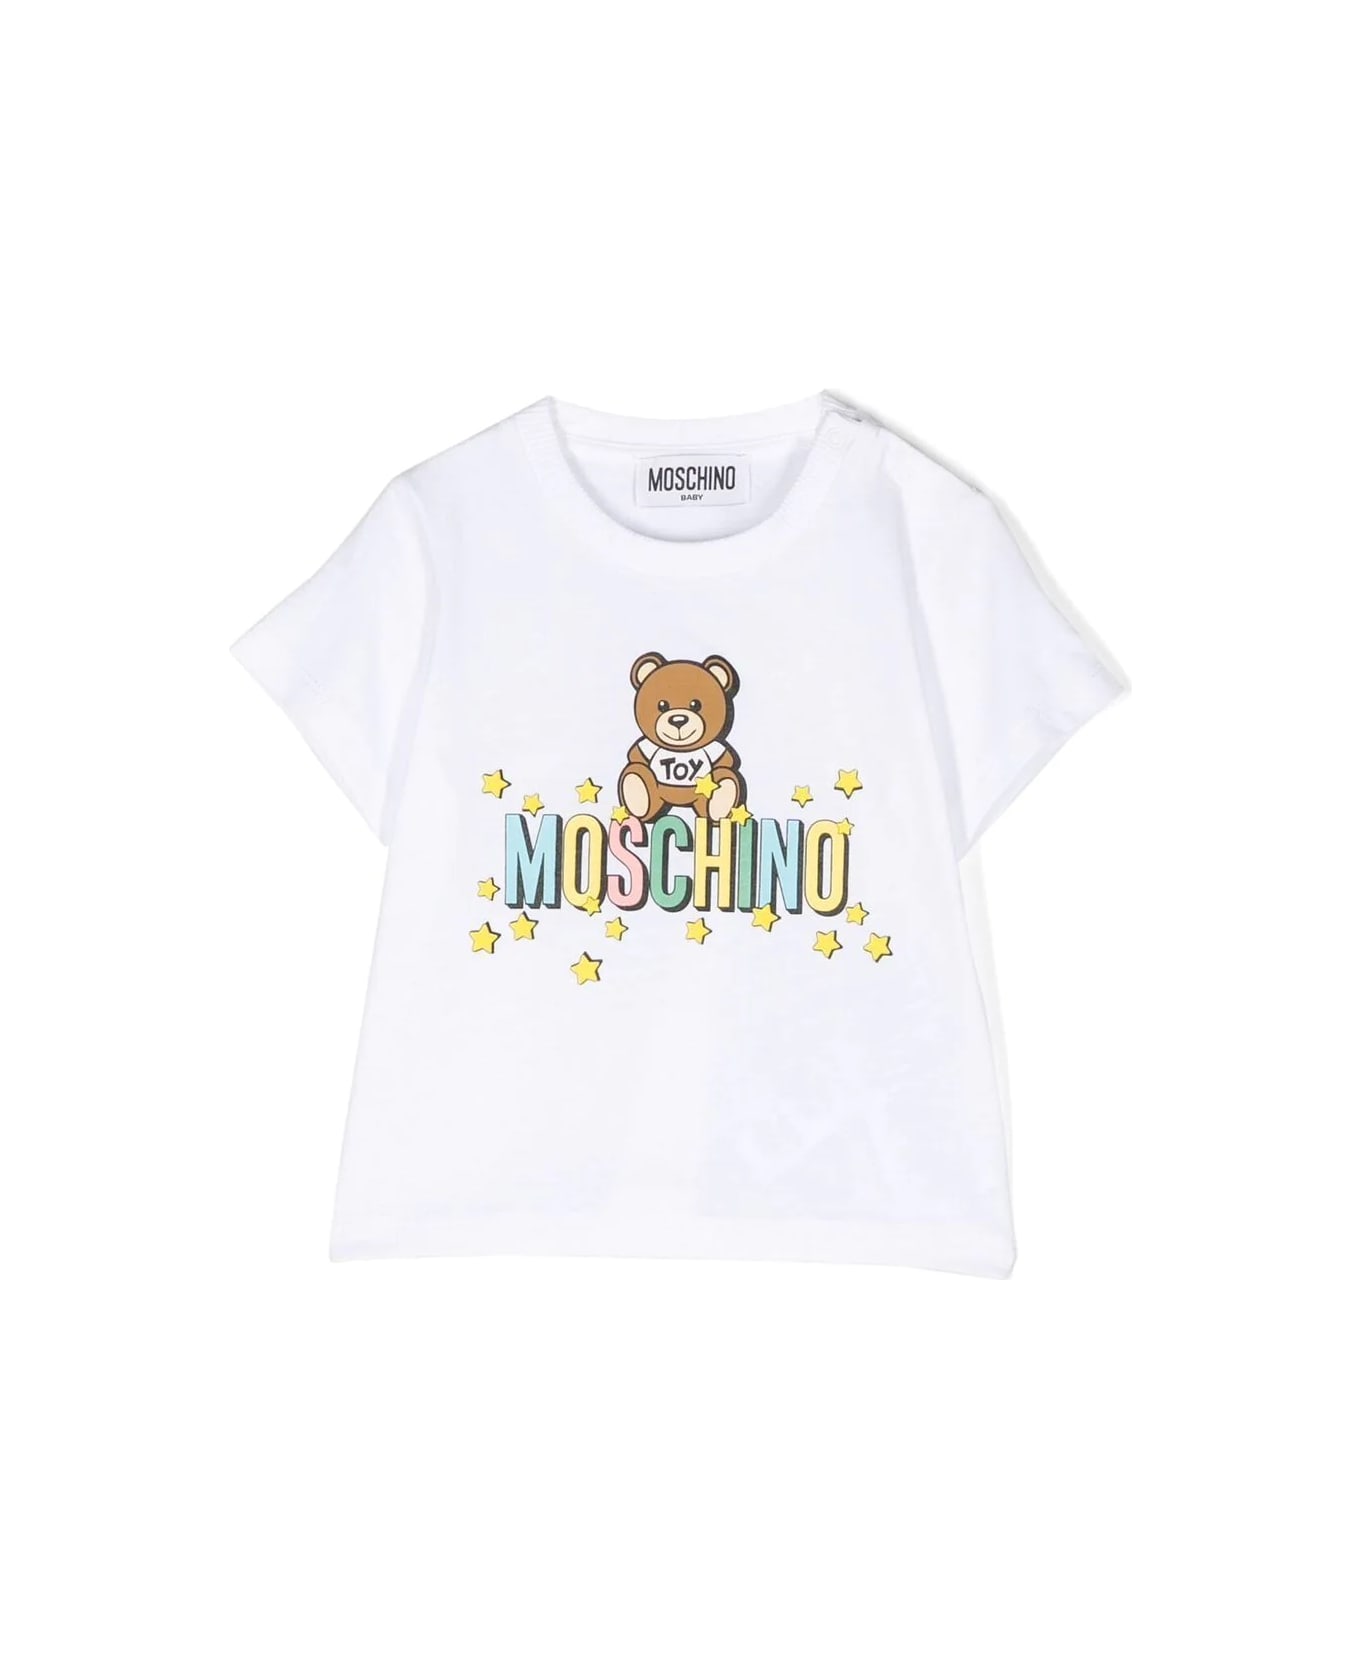 Moschino T-shirt With Teddy Bear Print - White